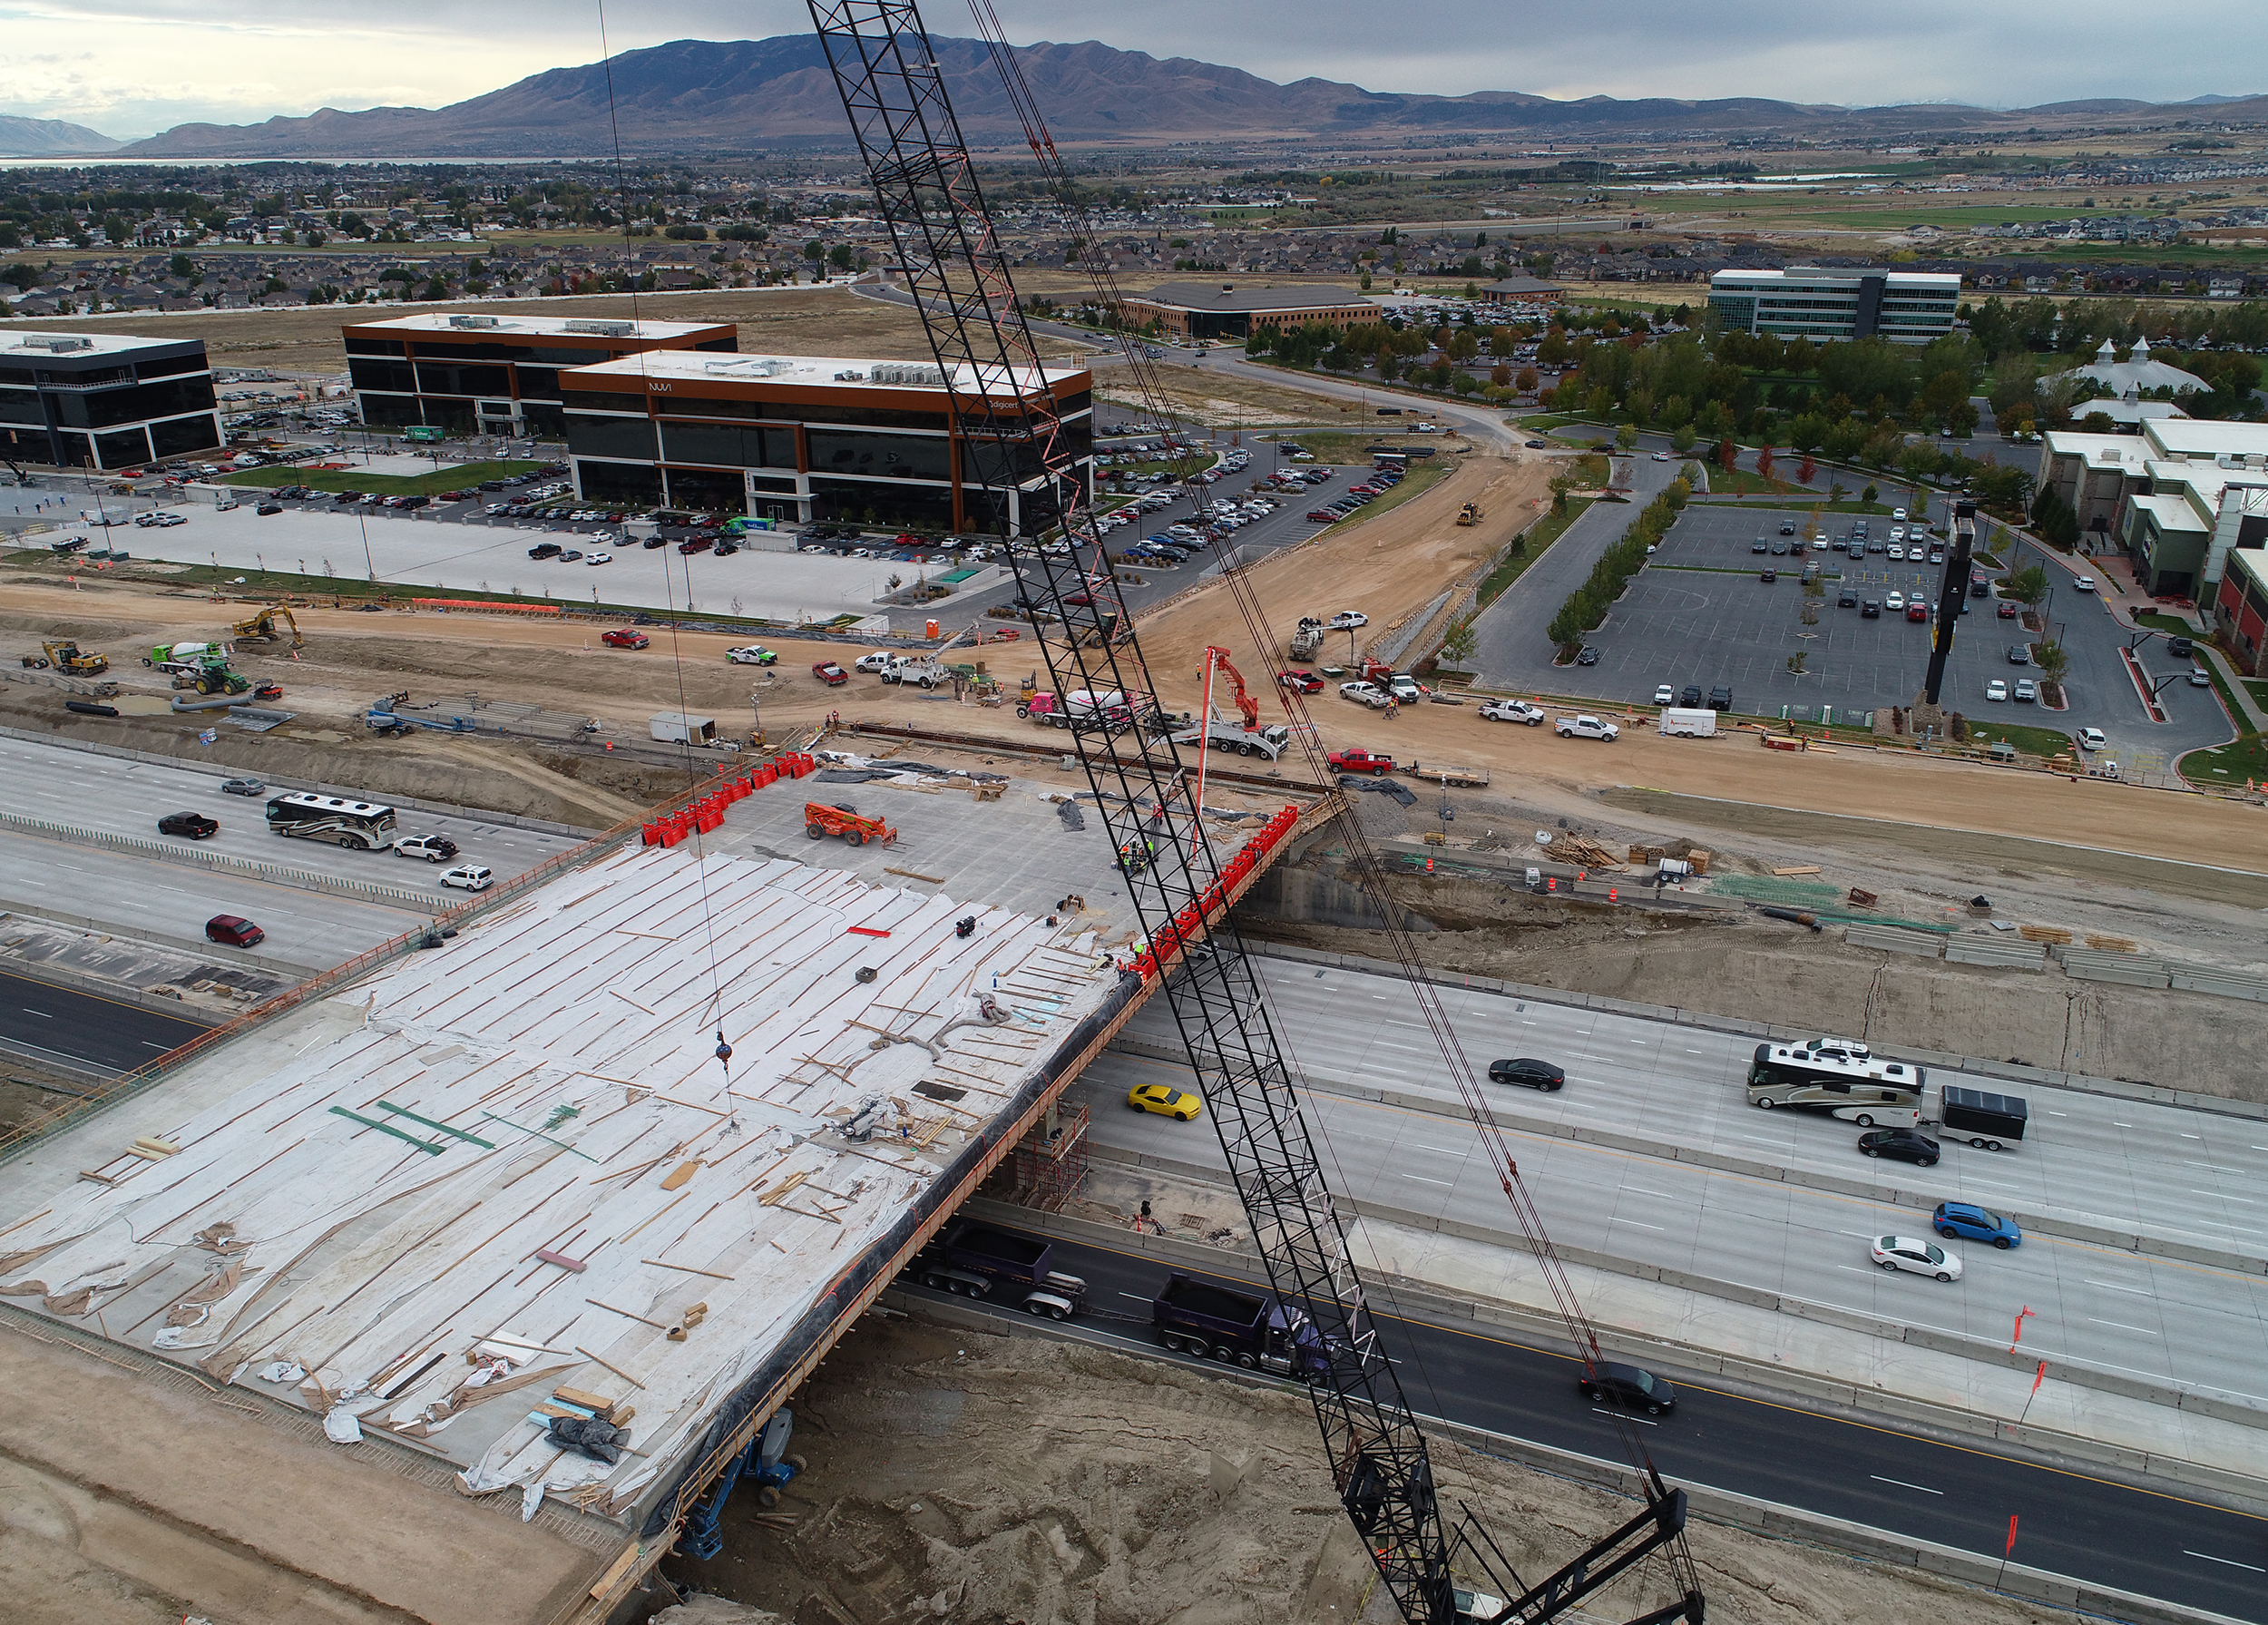 Construction on one of 13 bridges included in the I-15 Technology Corridor in Utah.